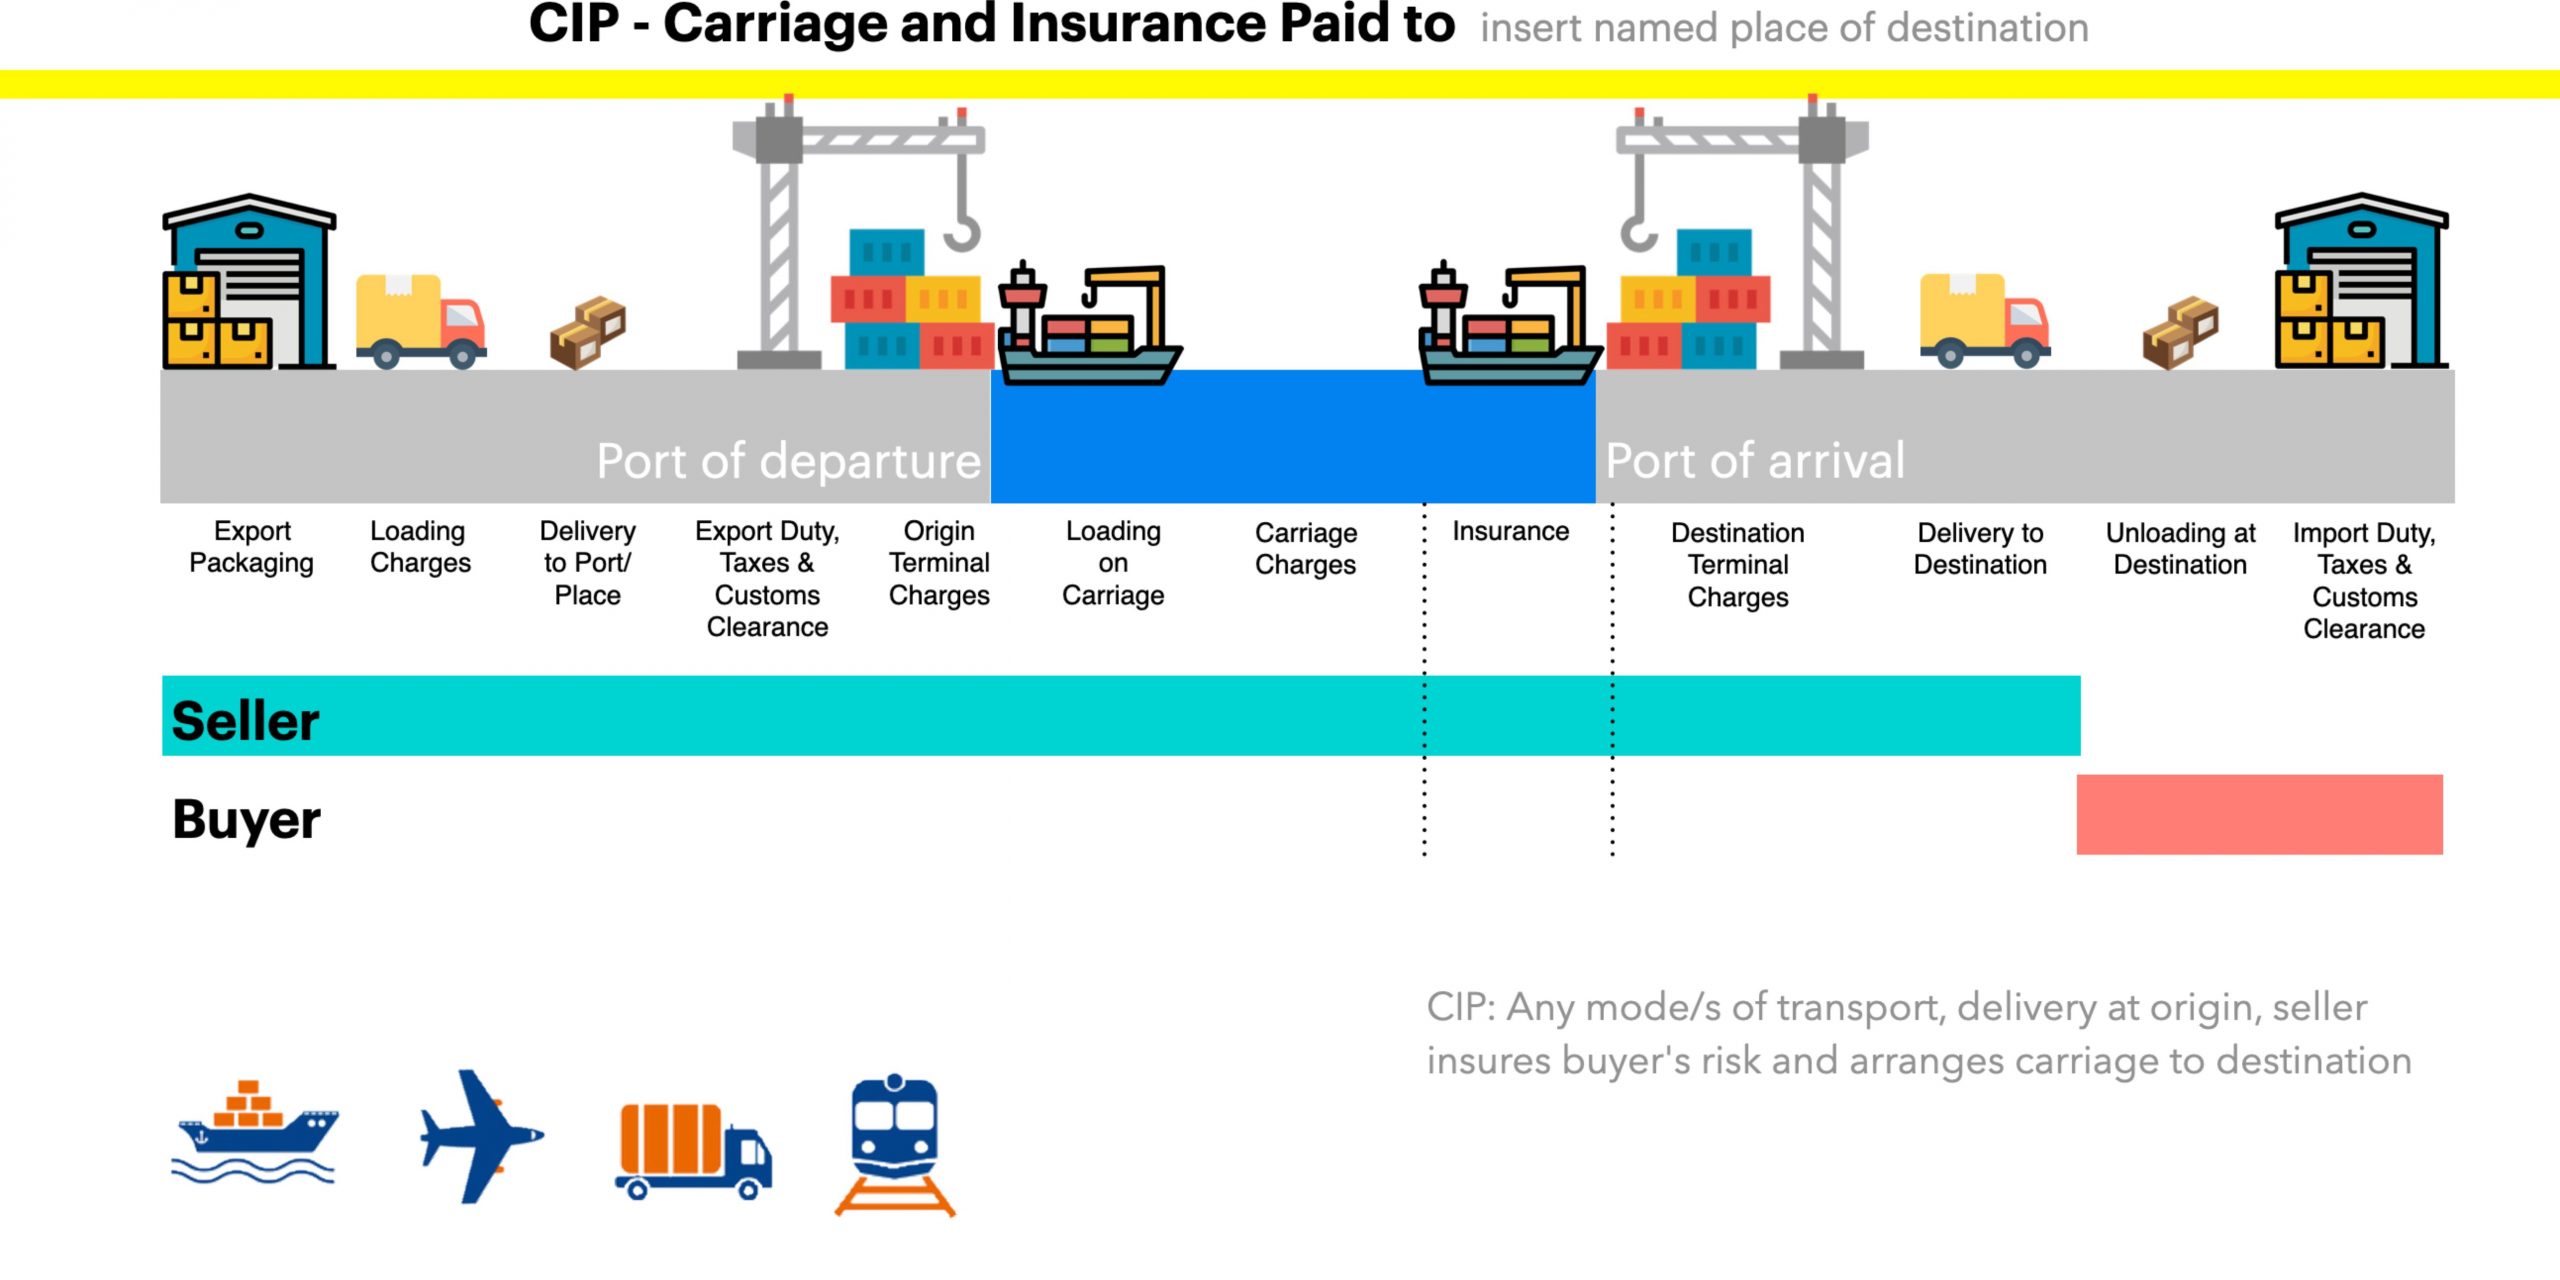 CIP (Carriage and Insurance Paid To)